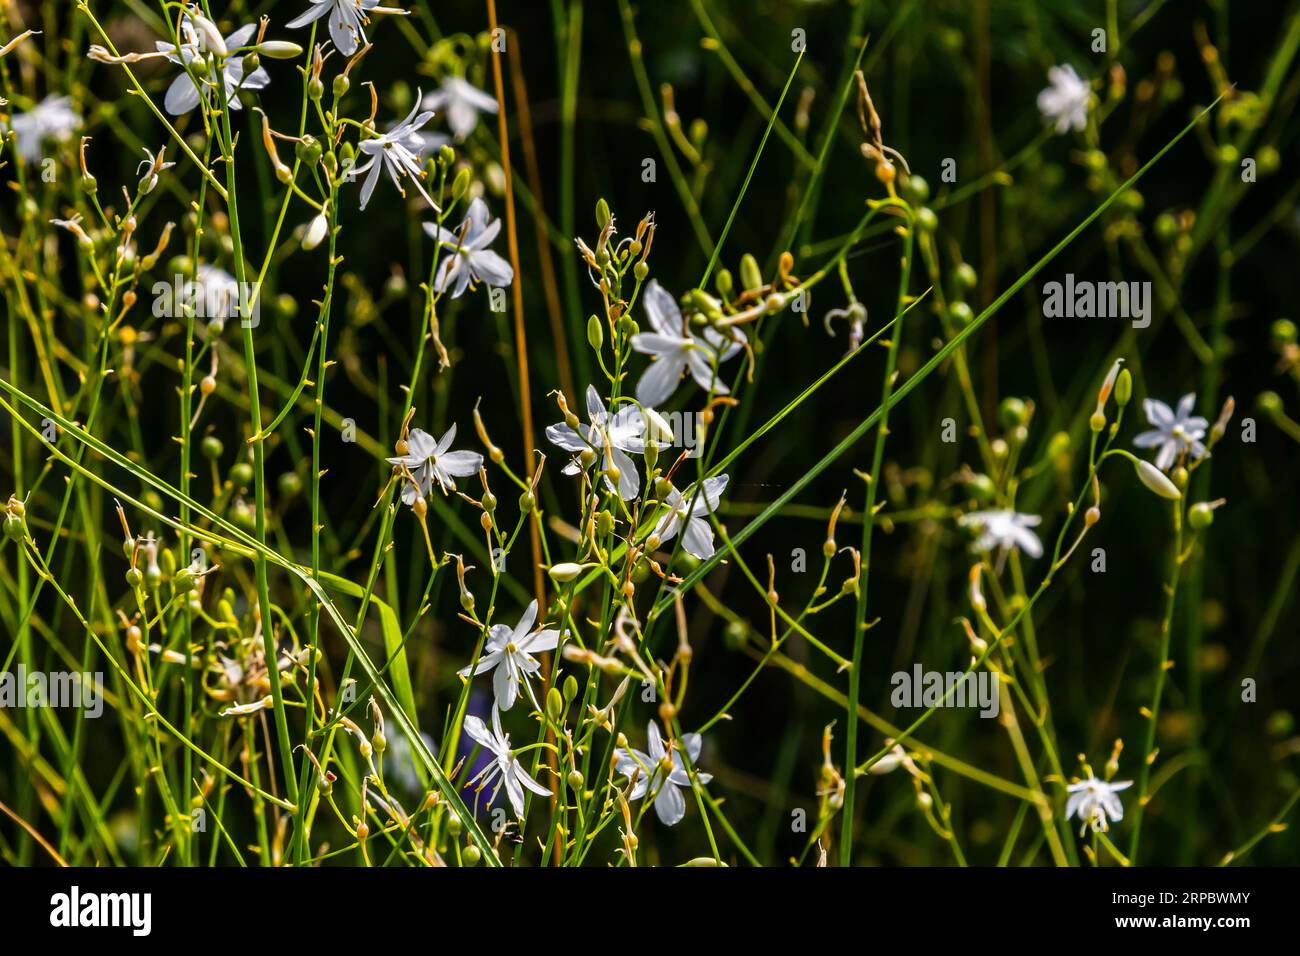 Fragile white and yellow flowers of Anthericum ramosum, star-shaped, growing in a meadow in the wild, blurred green background, warm colors, bright an Stock Photo